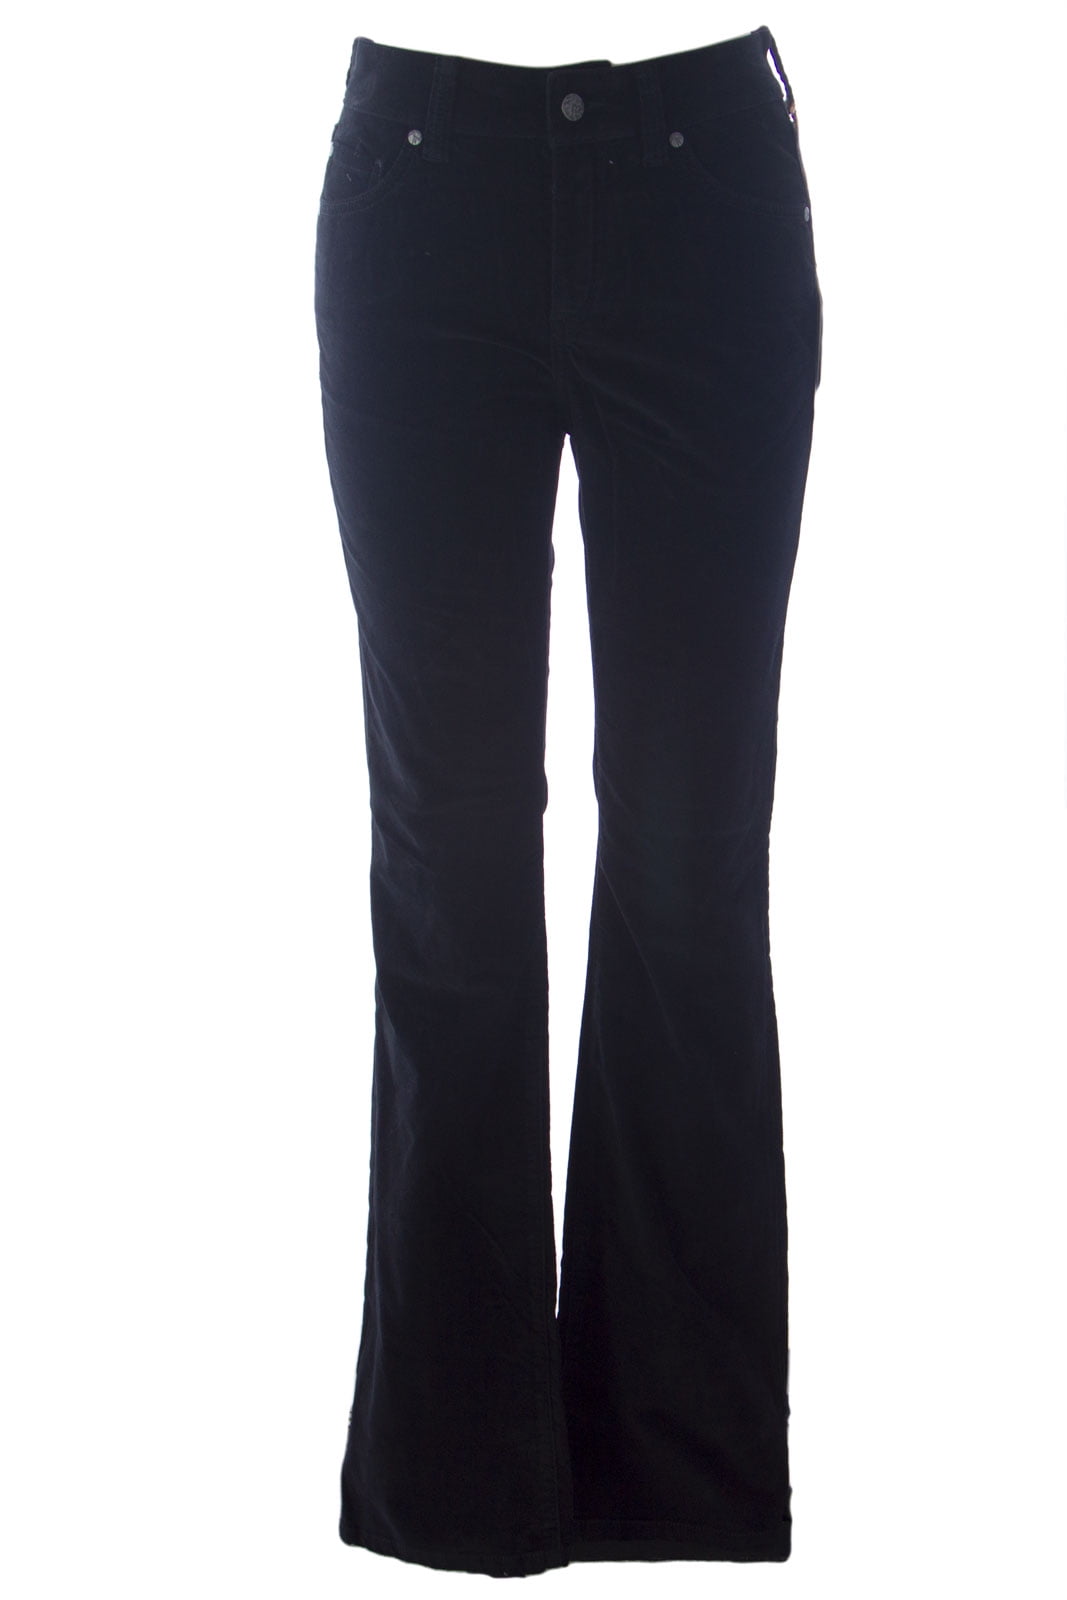 MIRACLEBODY by Miraclesuit Women's Samantha Boot Cut Velvet Jeans Sz 2 ...